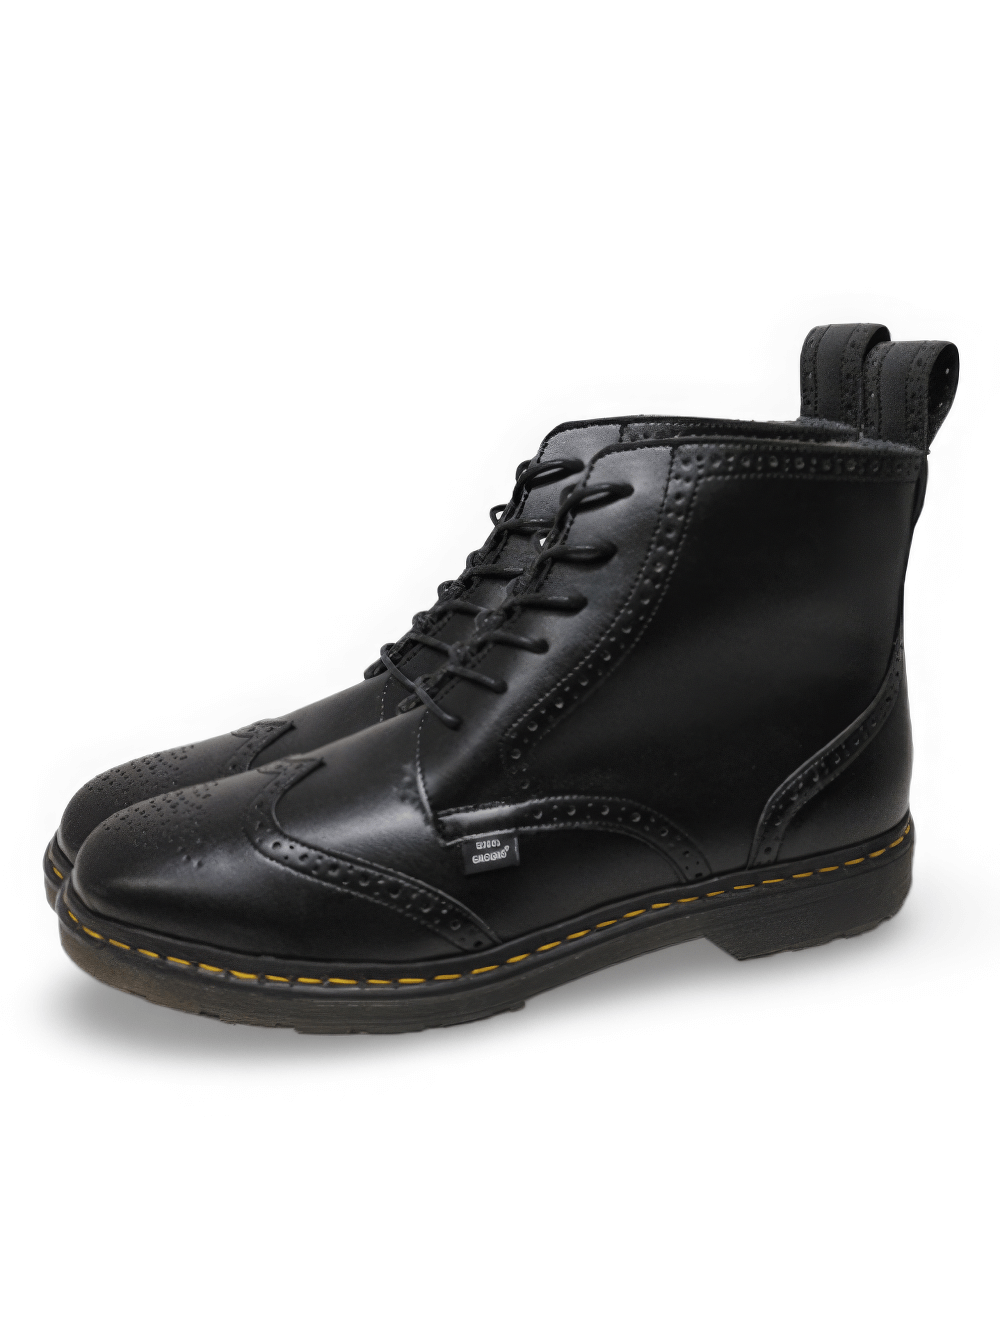 Versatile Black Lace-Up Ankle Boots for Men and Women